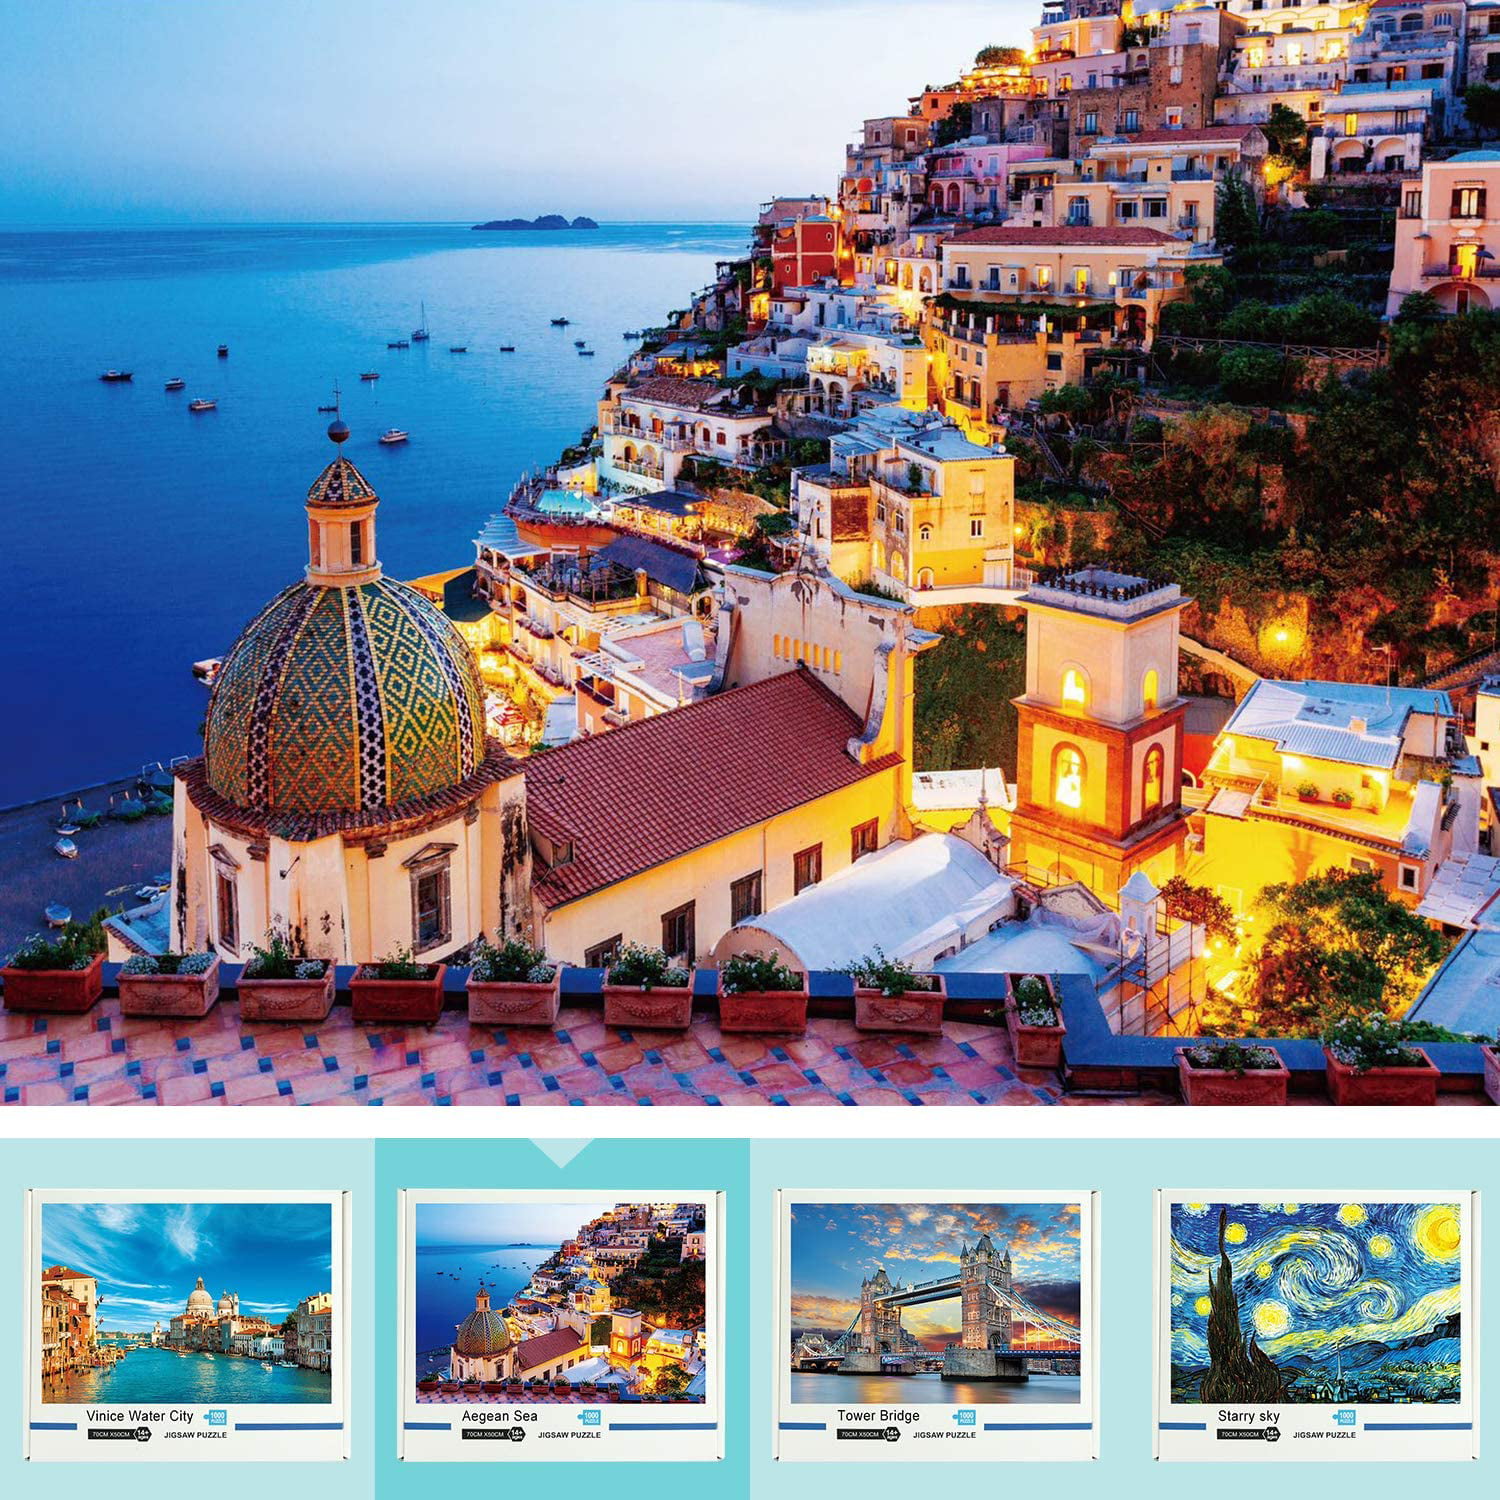 1000 Pieces Jigsaw Puzzles Educational Toy Italian Landscape Scenery Puzzle Toy 